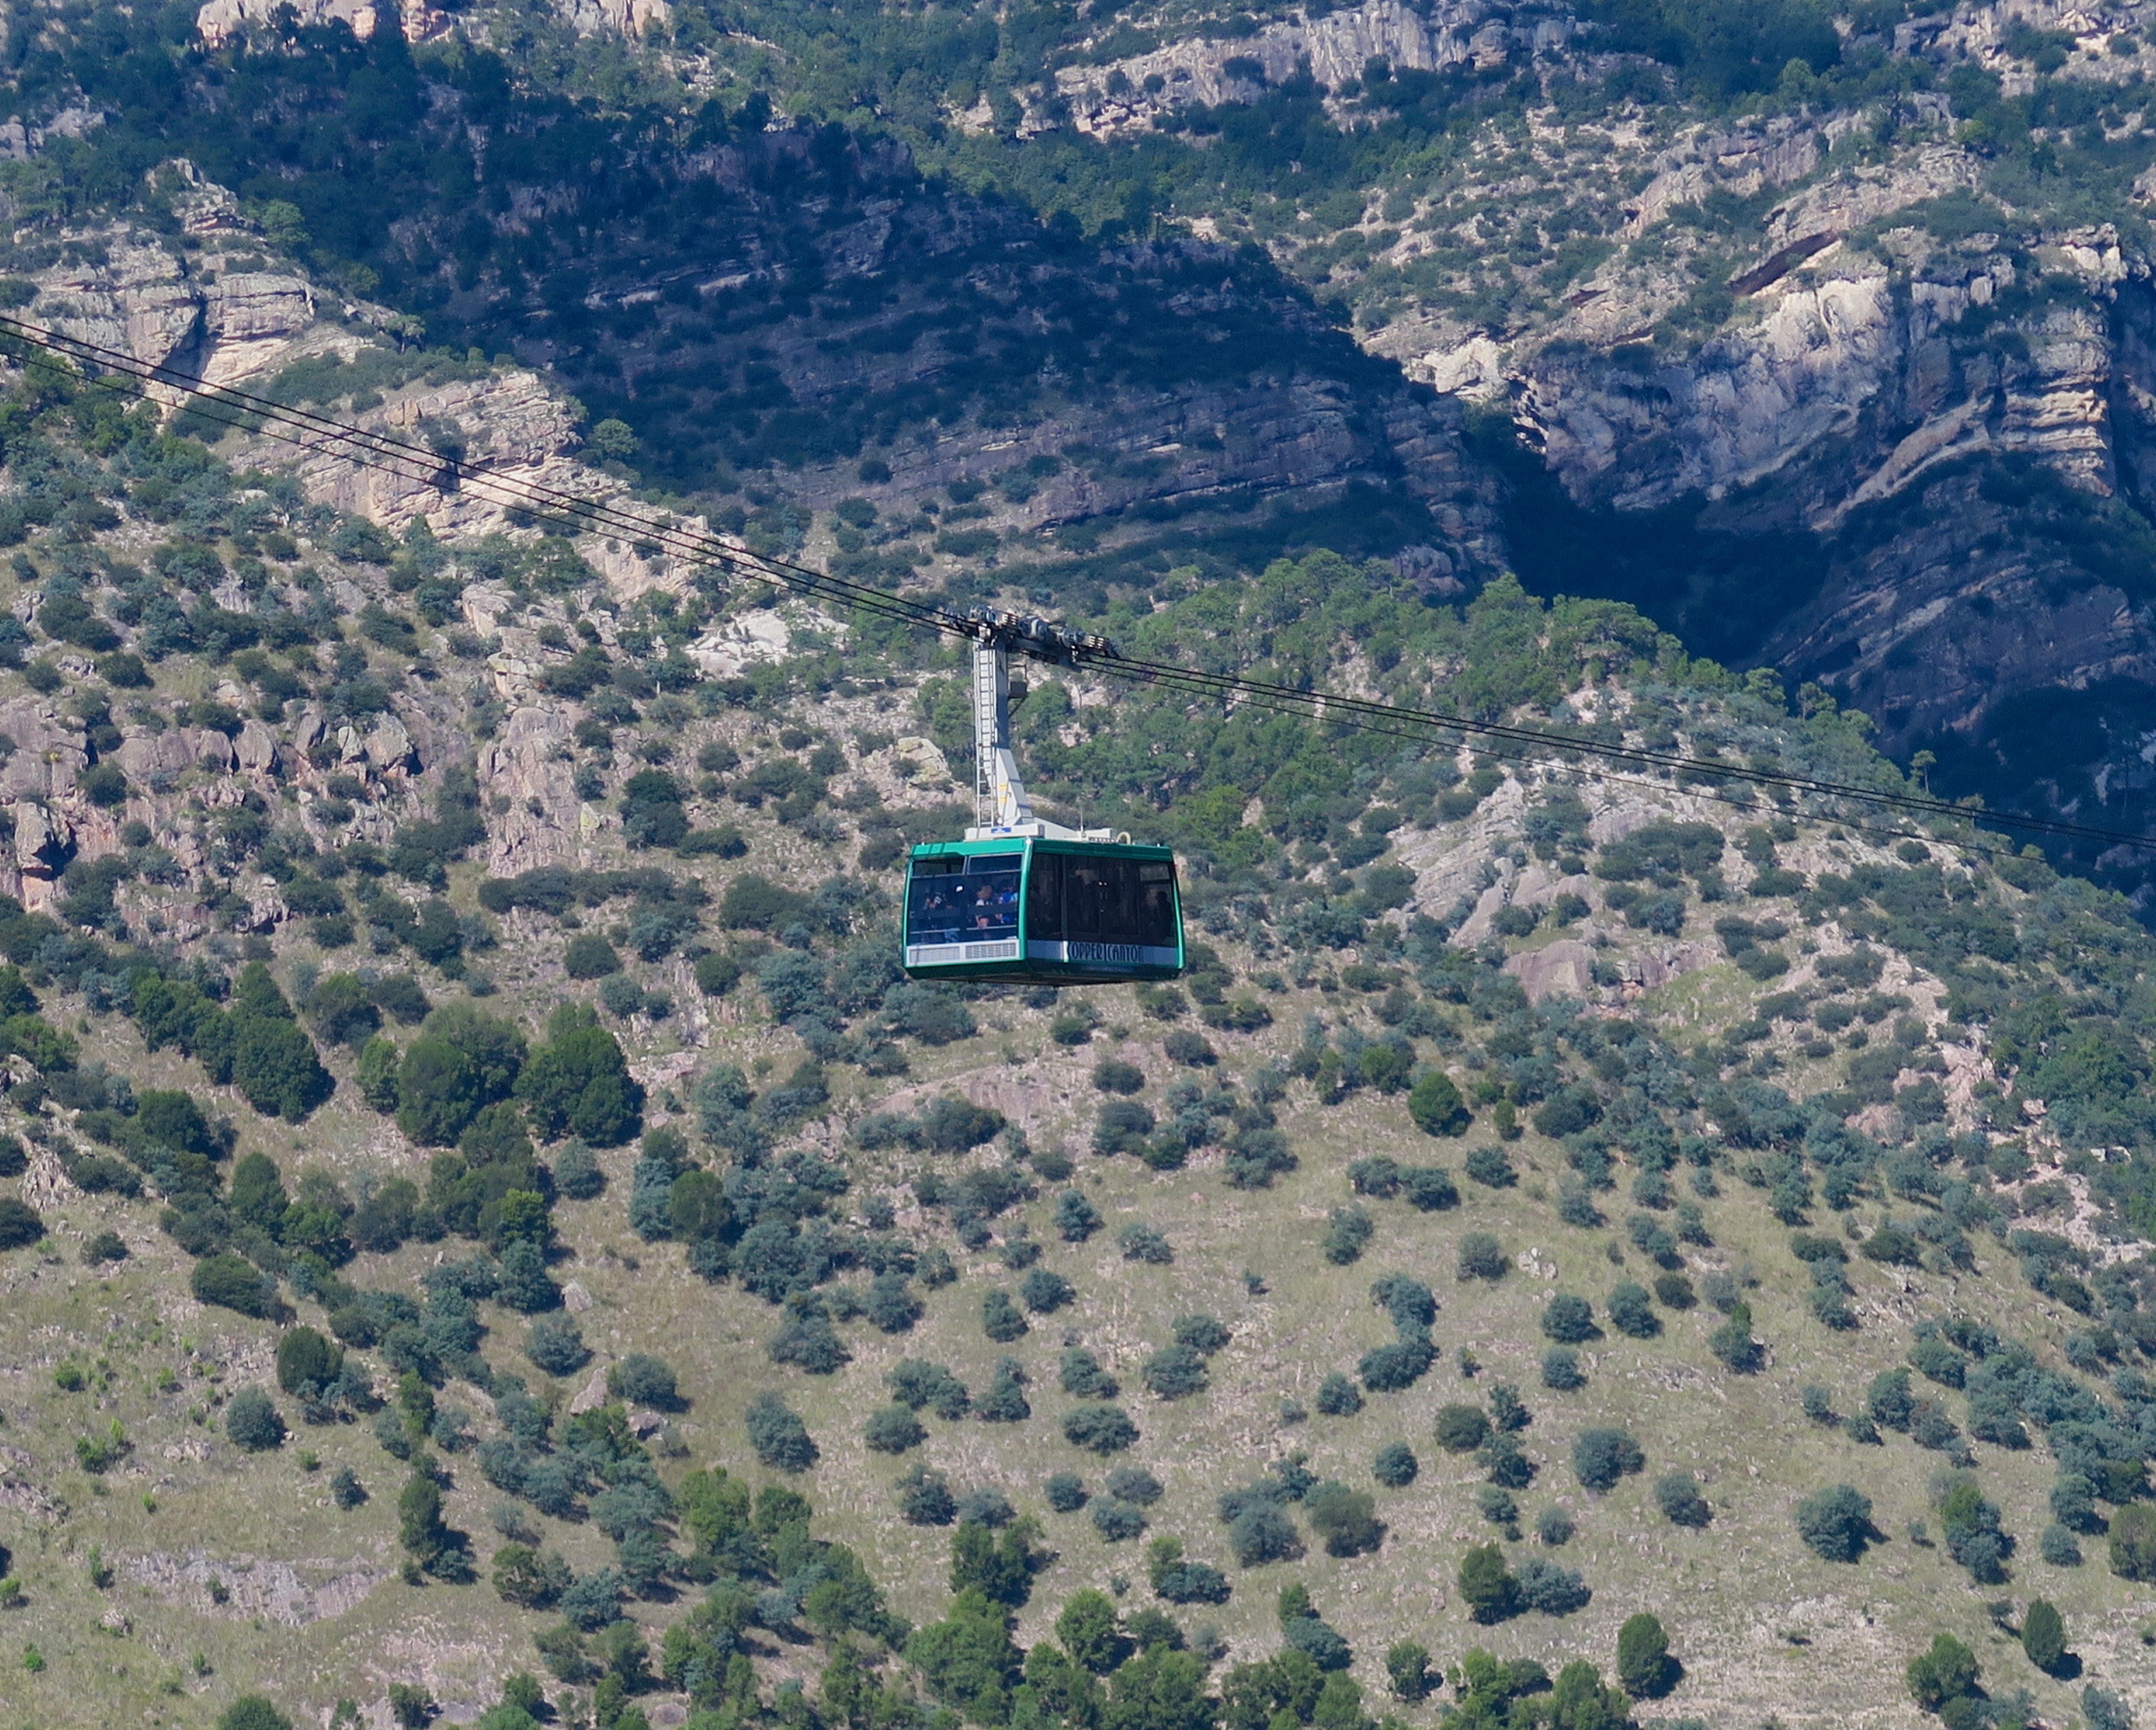 Tram at Copper Canyon